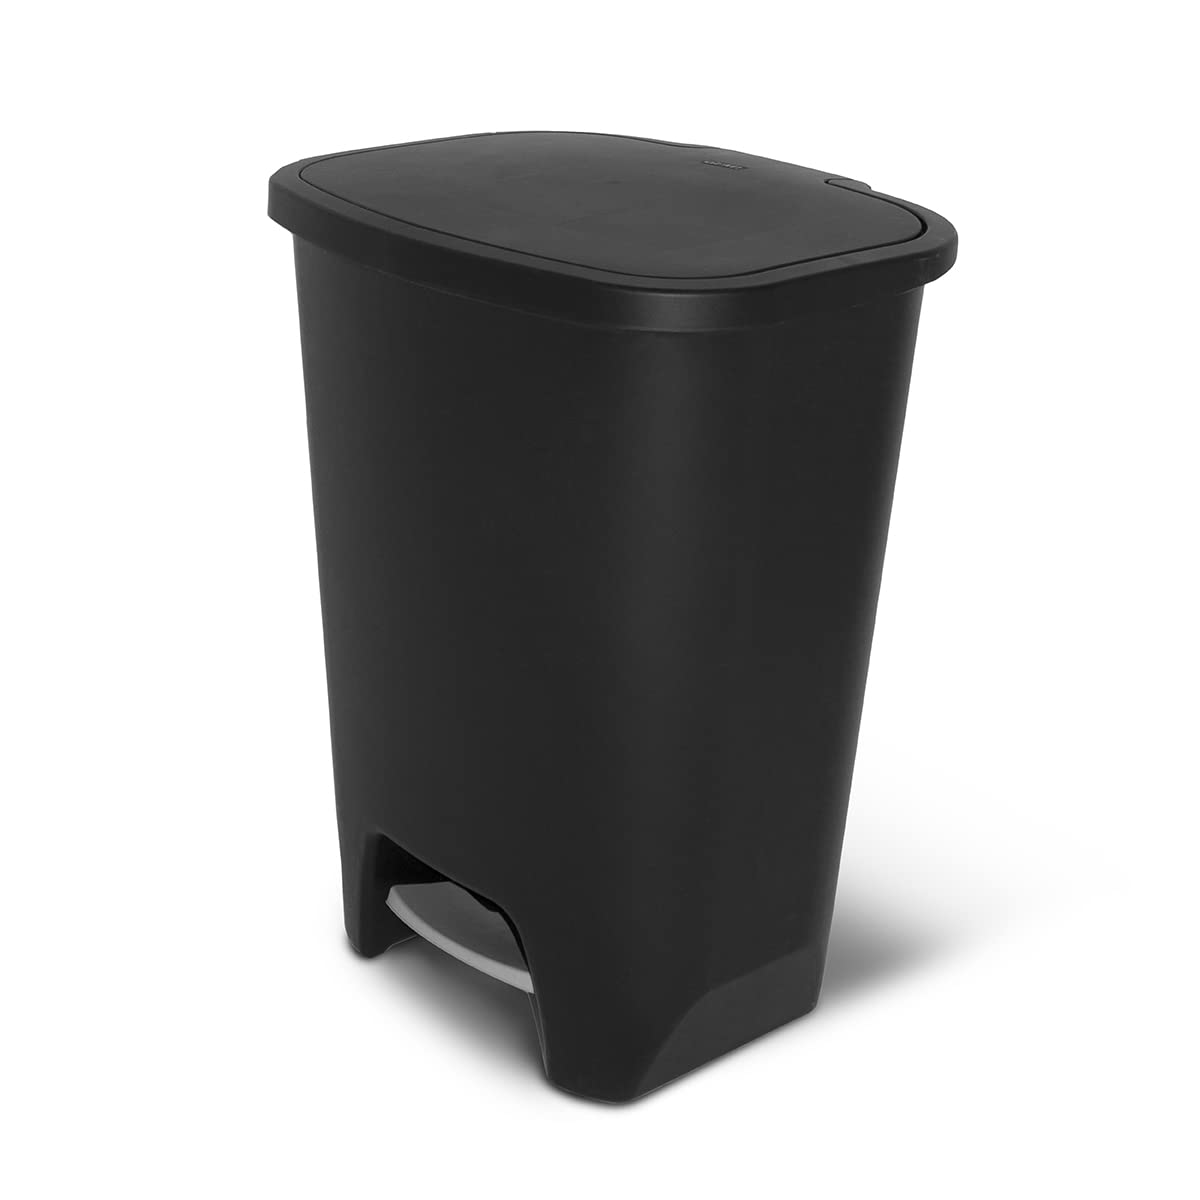 https://bigbigmart.com/wp-content/uploads/2023/10/Glad-20-Gallon-Trash-Can-Plastic-Kitchen-Waste-Bin-with-Odor-Protection-of-Lid-Hands-Free-with-Step-On-Foot-Pedal-and-Garbage-Bag-Rings-Black.jpg